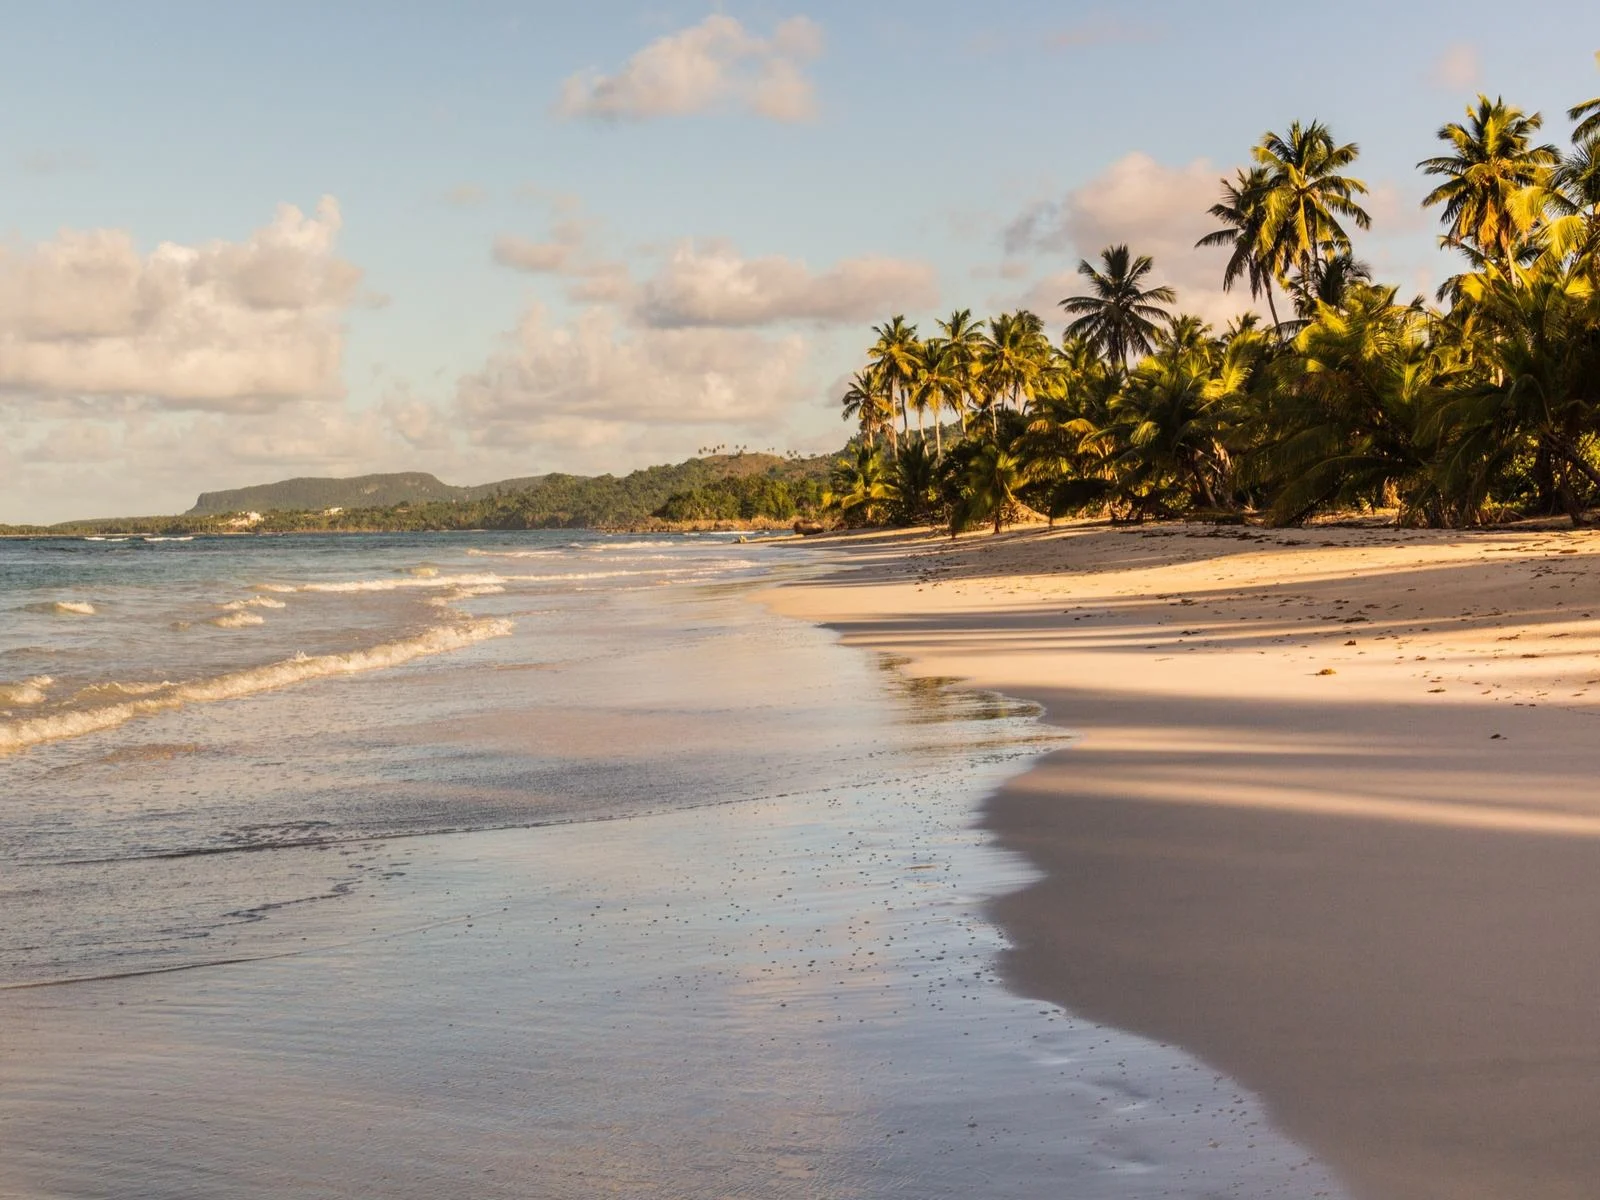 One of the best beaches in the Dominican Republic on a sunset, the fine sands at Playa Rincón in Las Galeras with its palm trees